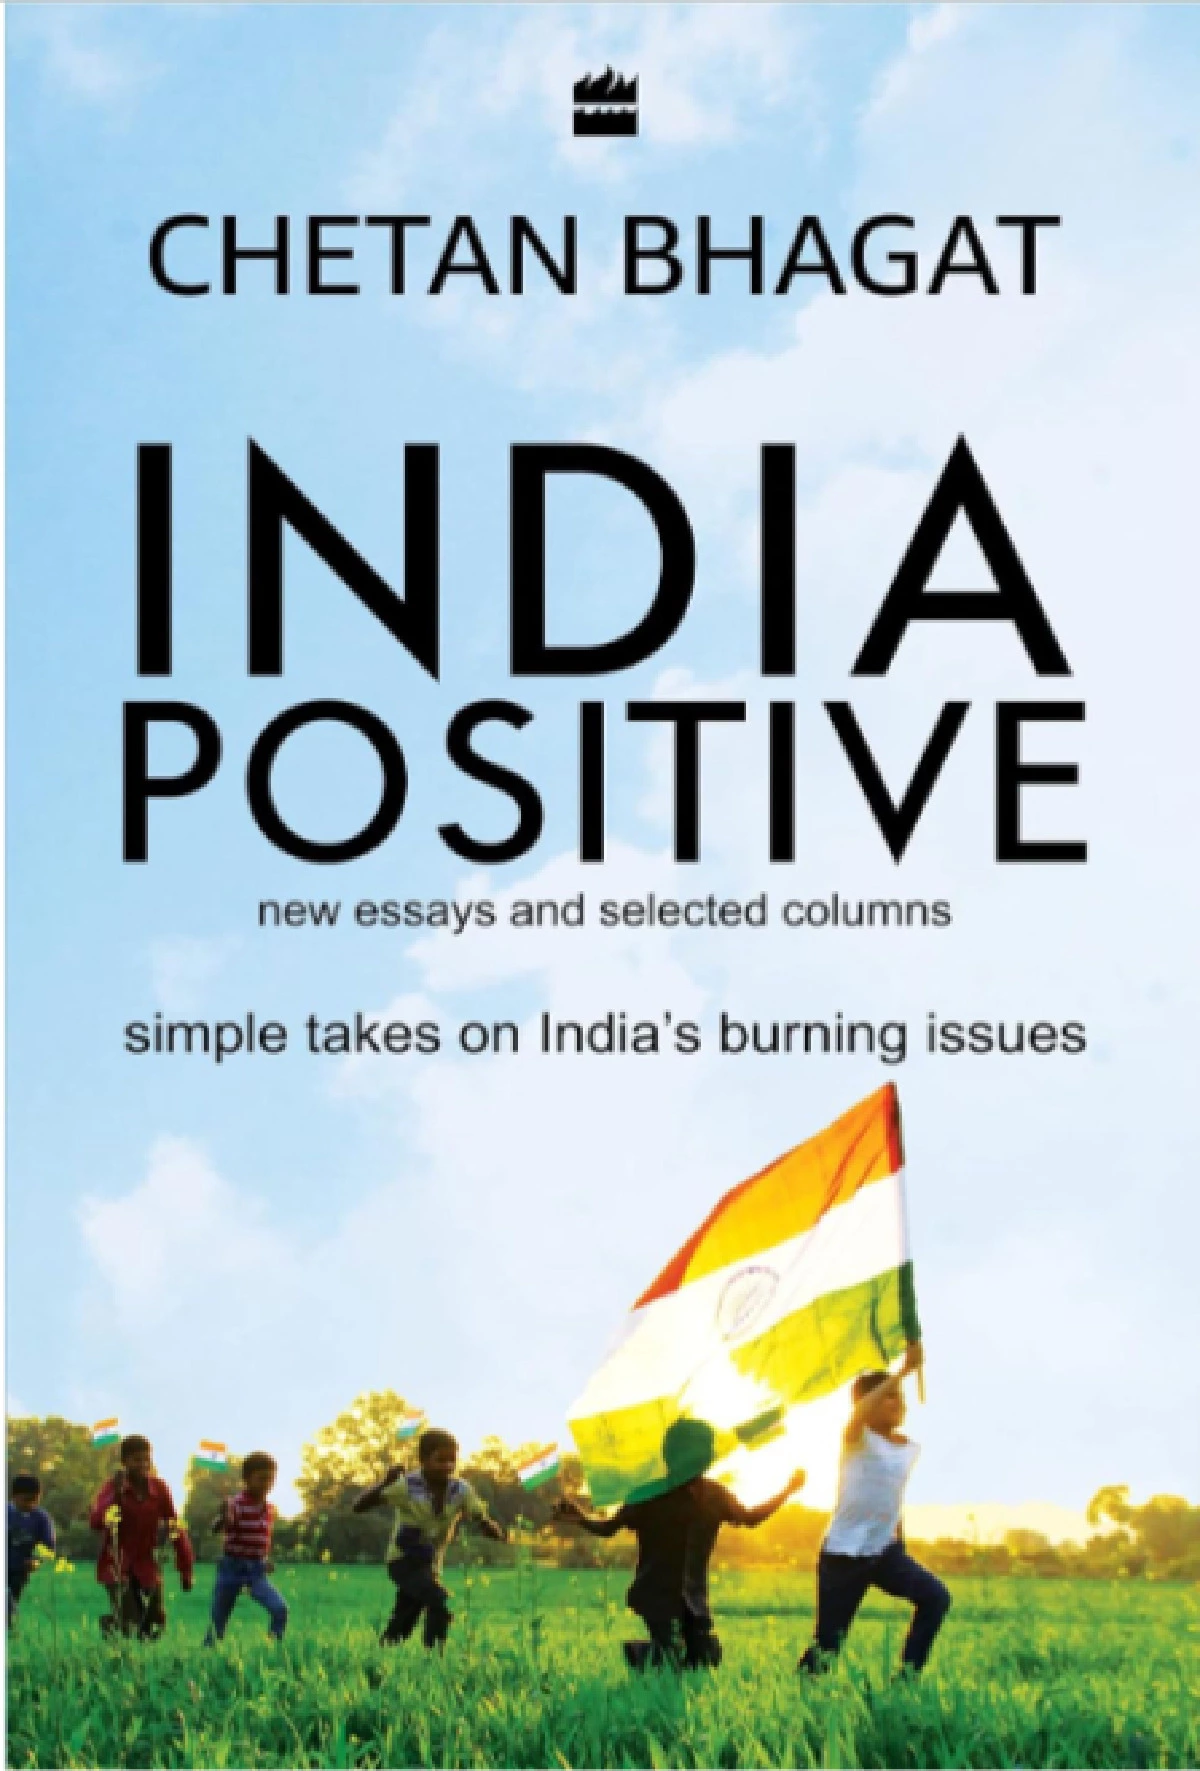 Making India Awesome Book